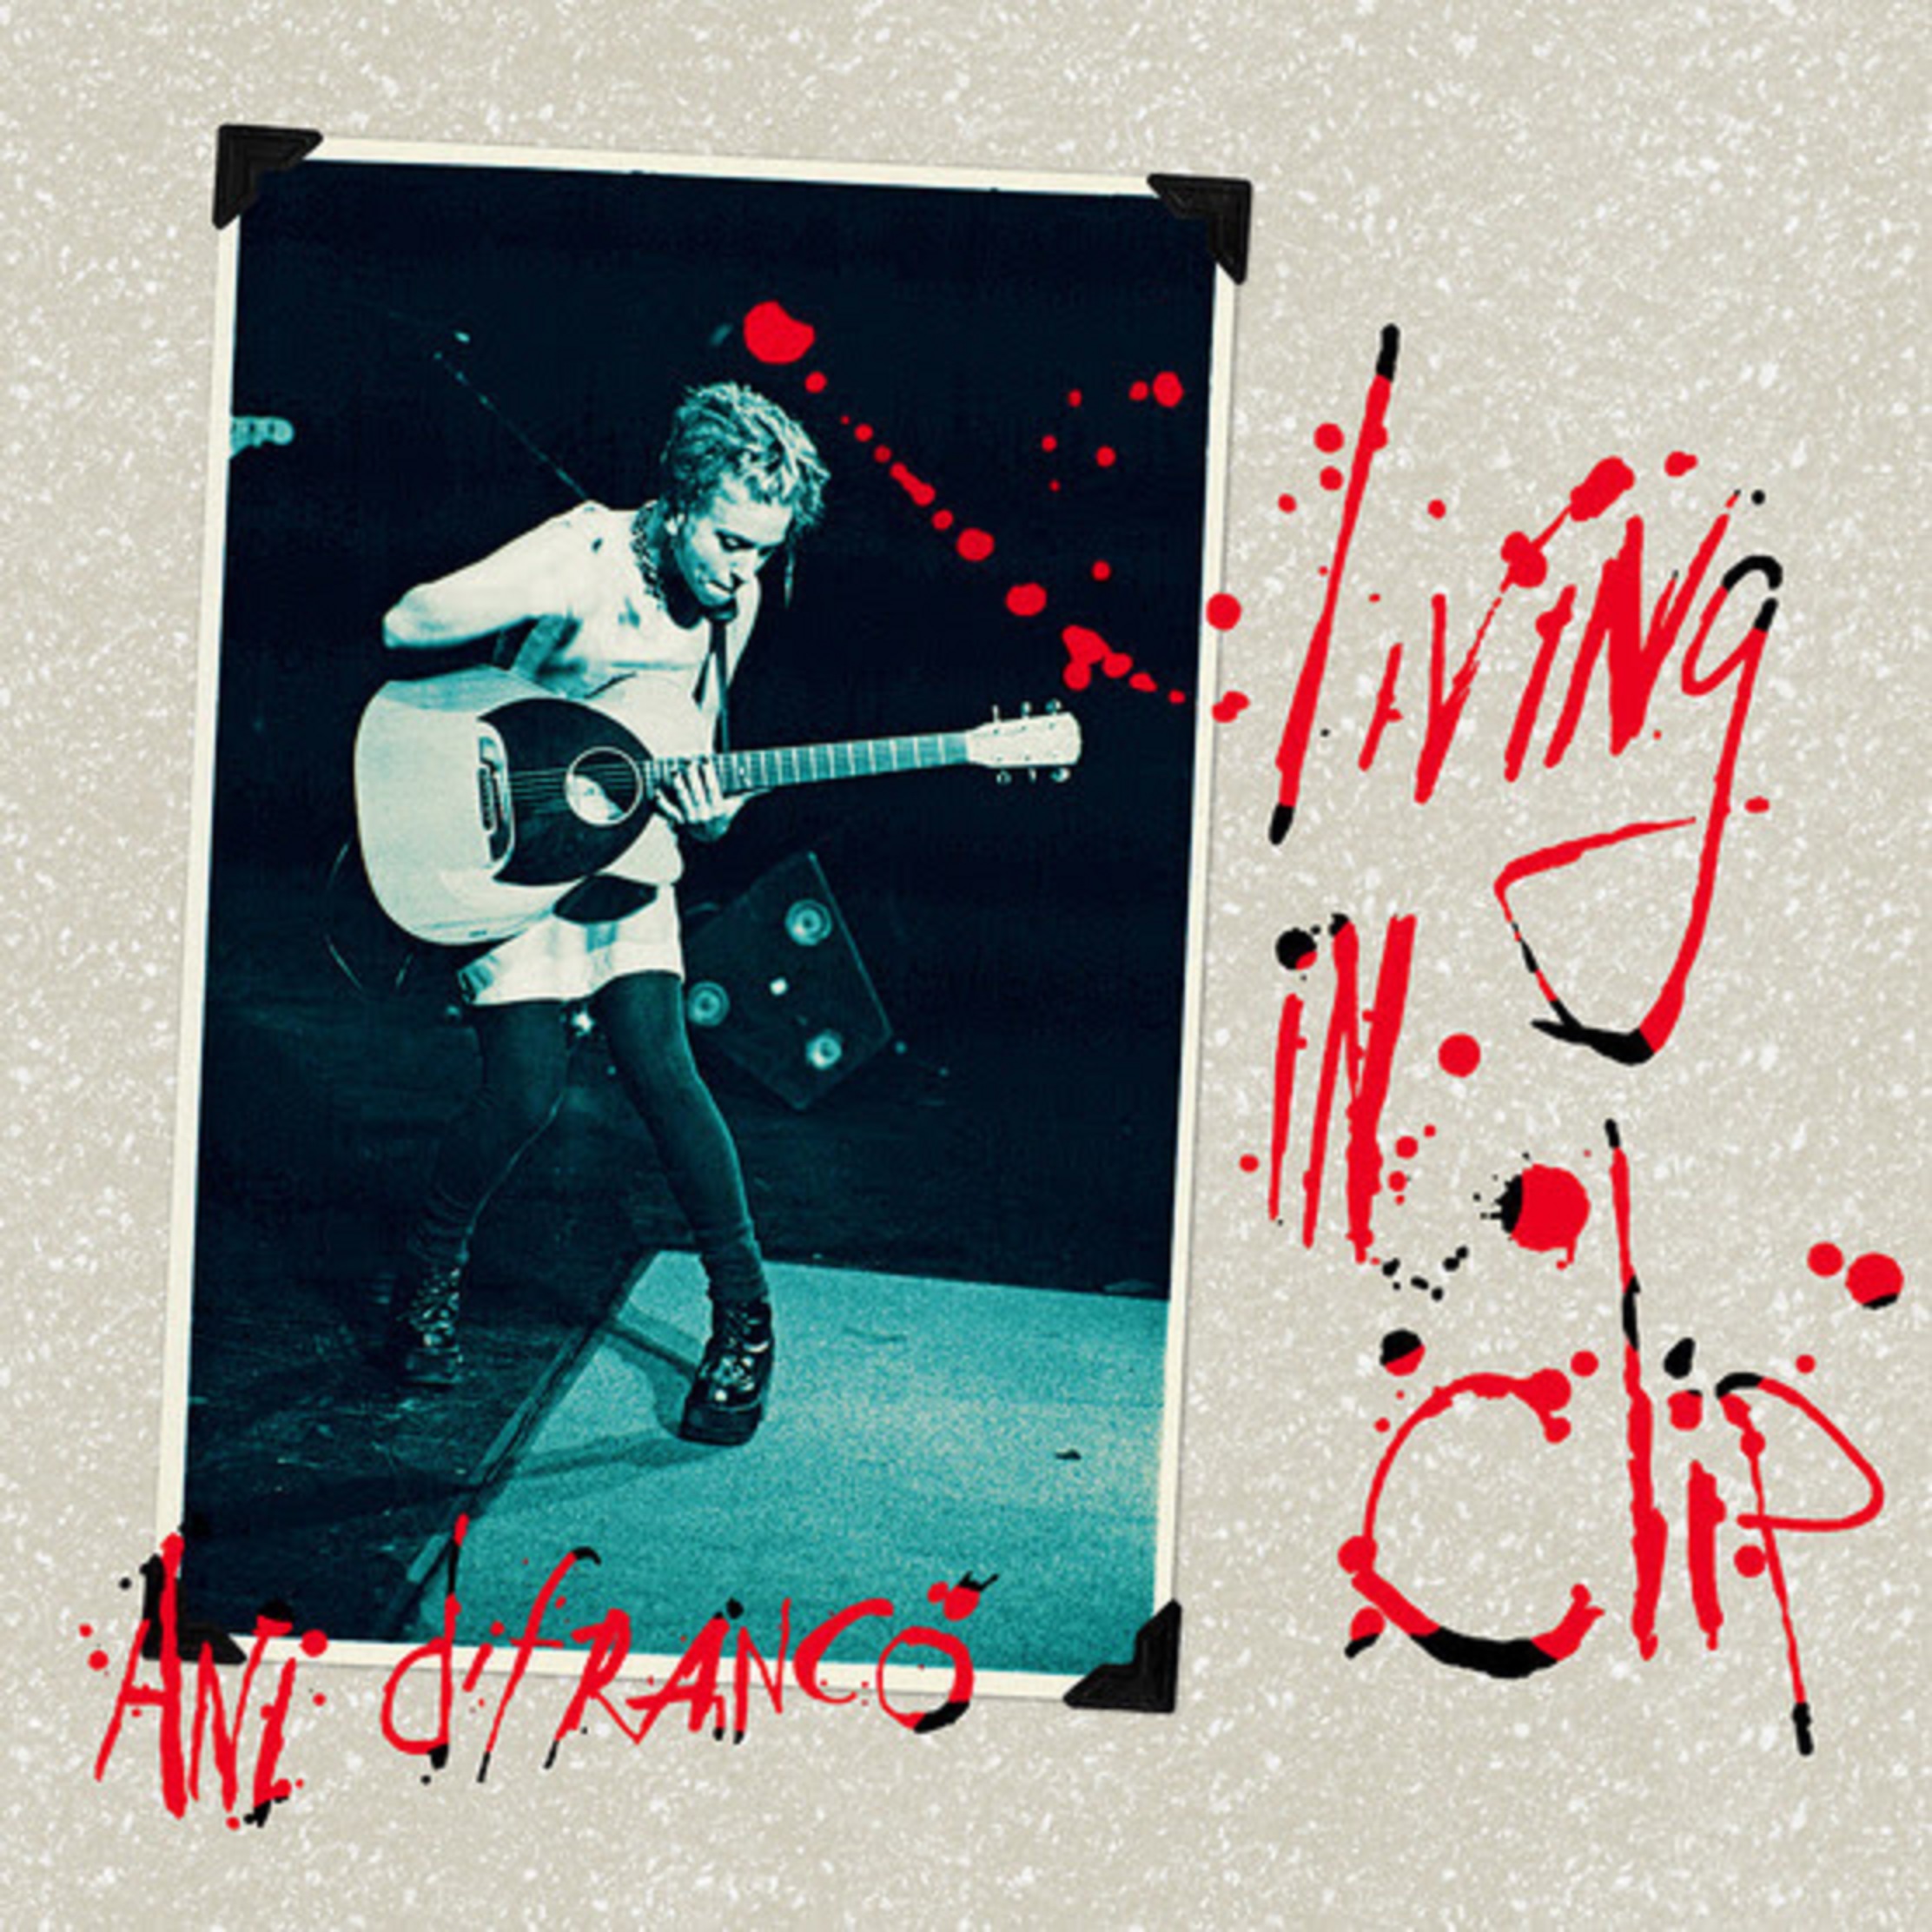 Ani DiFranco Celebrates Iconic Album LIVING IN CLIP on Its 25th Anniversary with First Vinyl Edition Out July 29